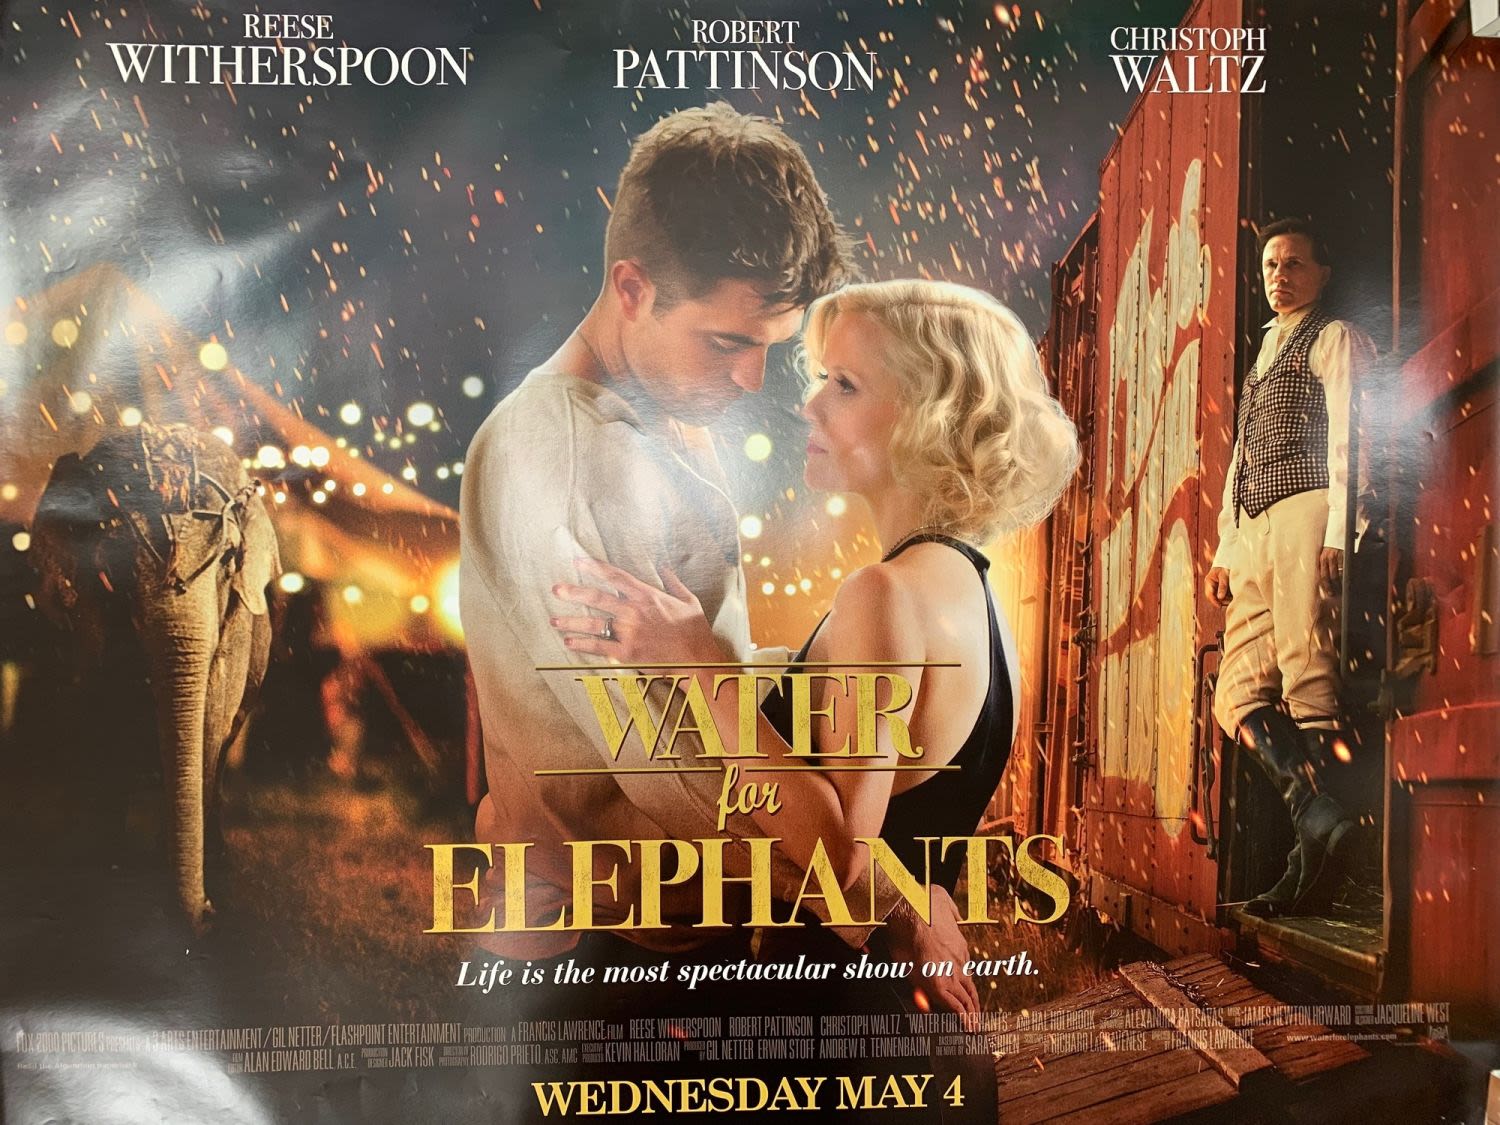 4 Movie Posters: Water for Elephants Beginners Anything Else Strictly Ballroom 100x76 cm